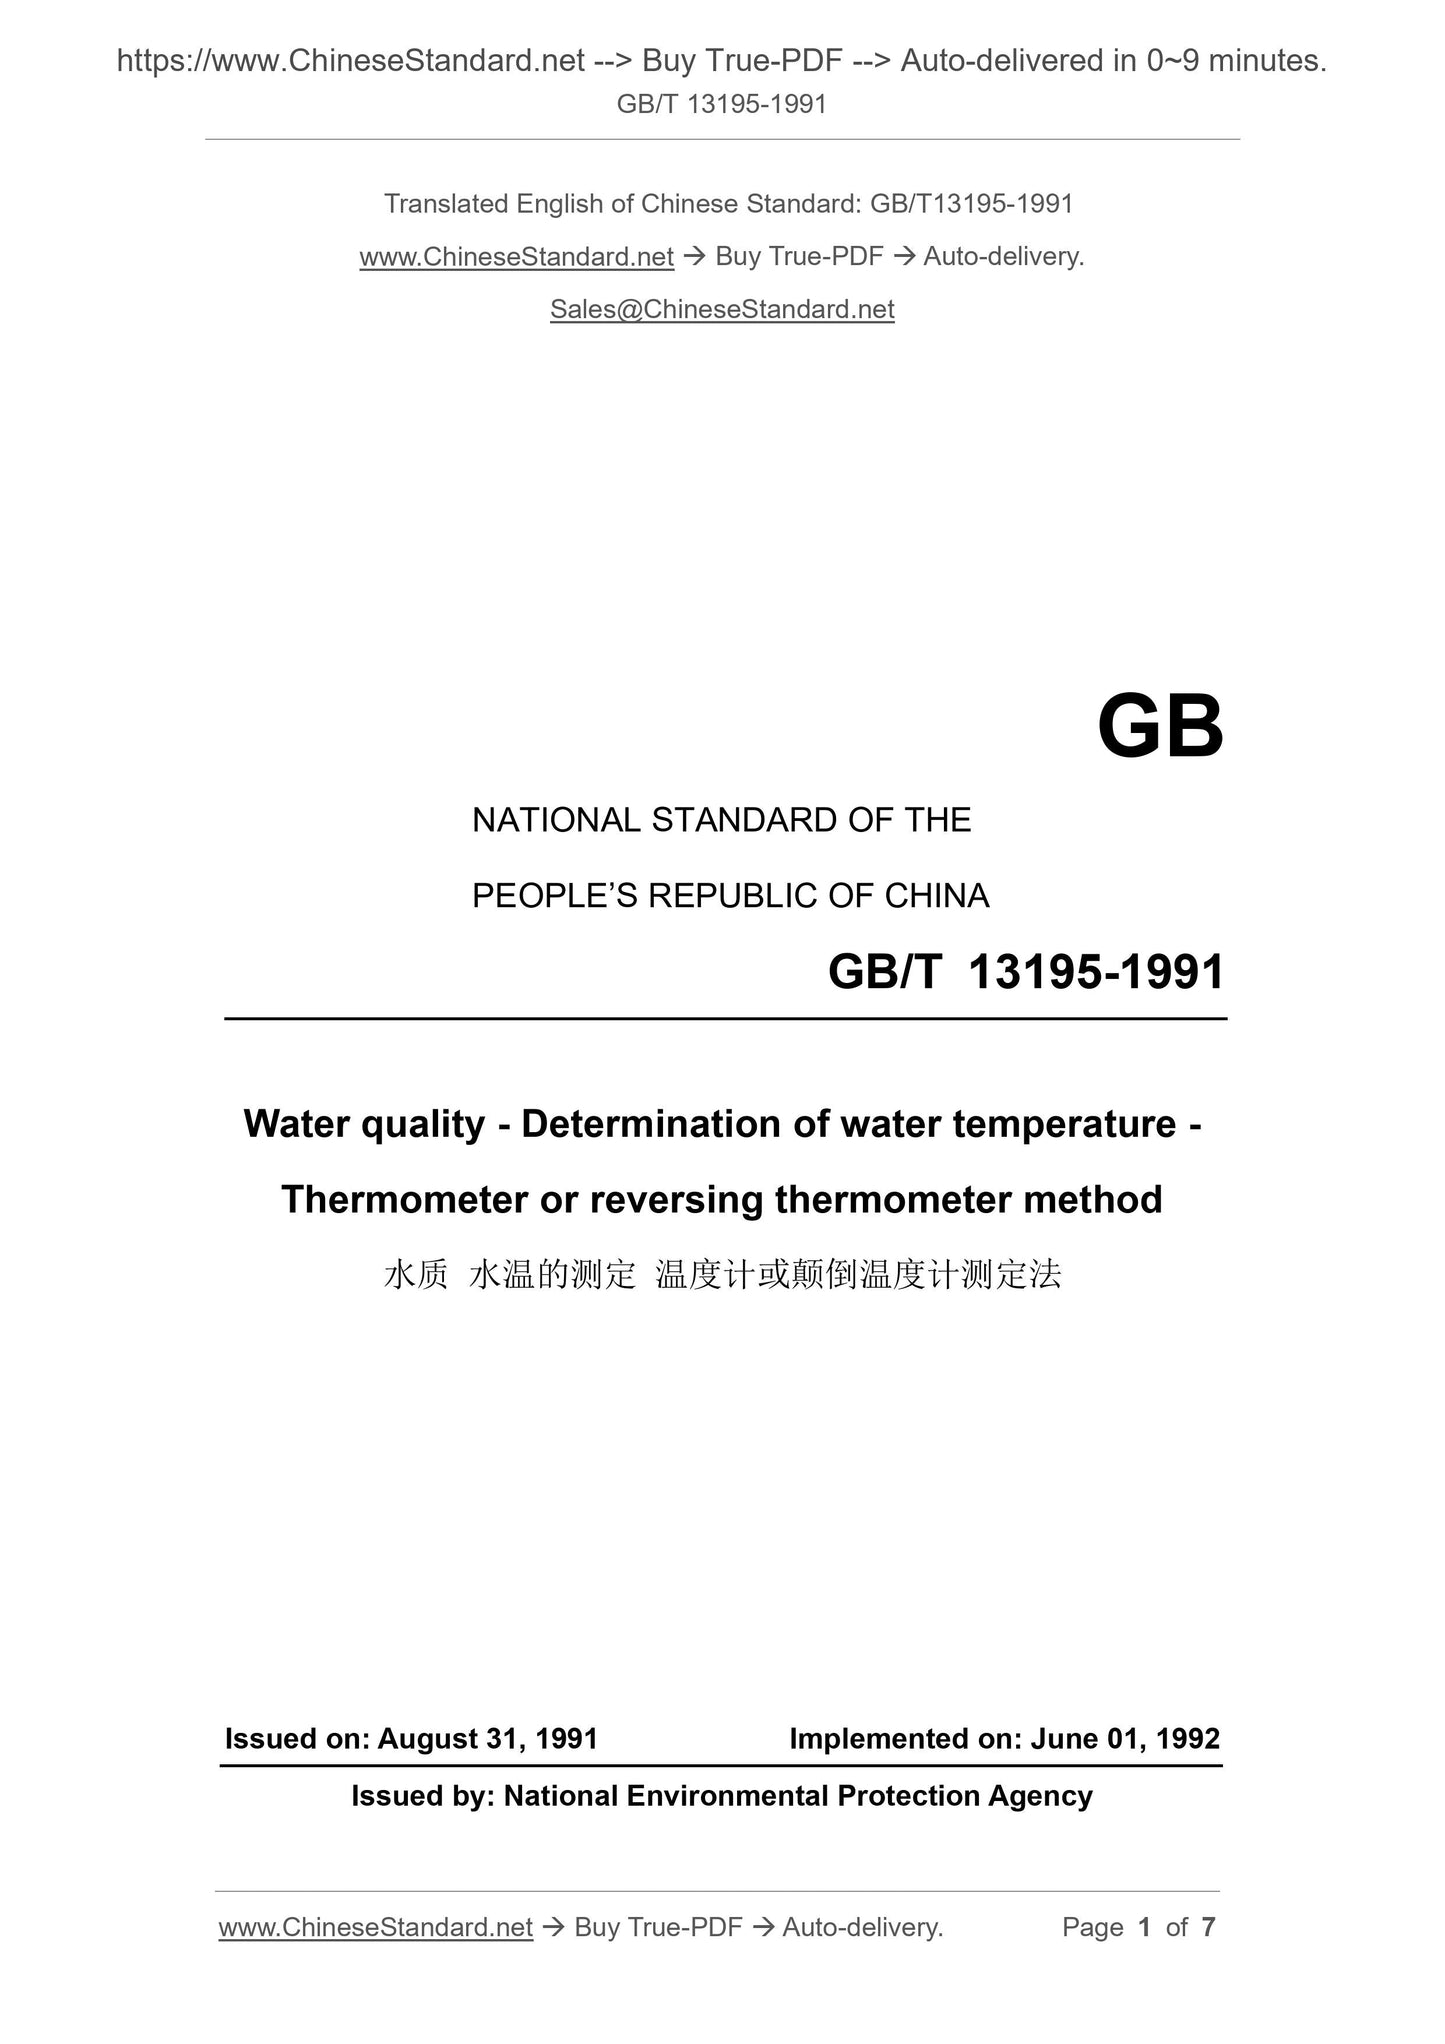 GB/T 13195-1991 Page 1